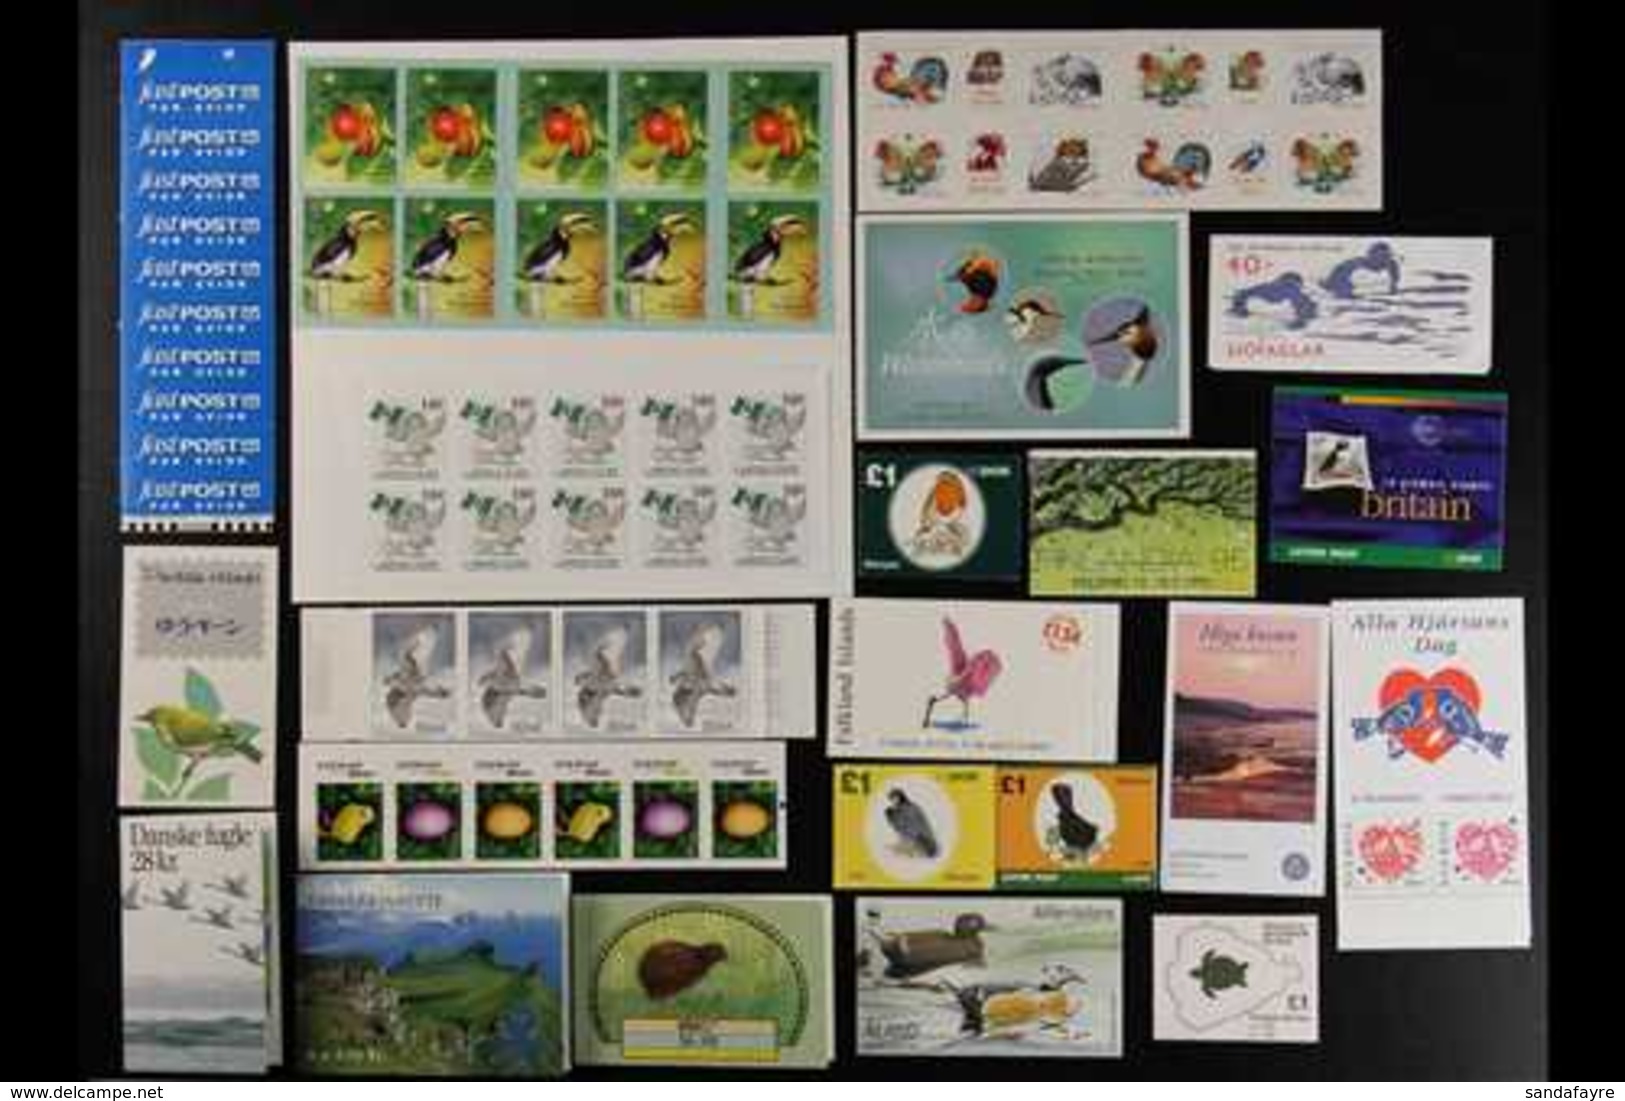 BIRDS BOOKLETS ACCUMULATION - Modern Issues From Across The World, We See Falkland Islands, Sweden, Singapore, Ireland,  - Non Classificati